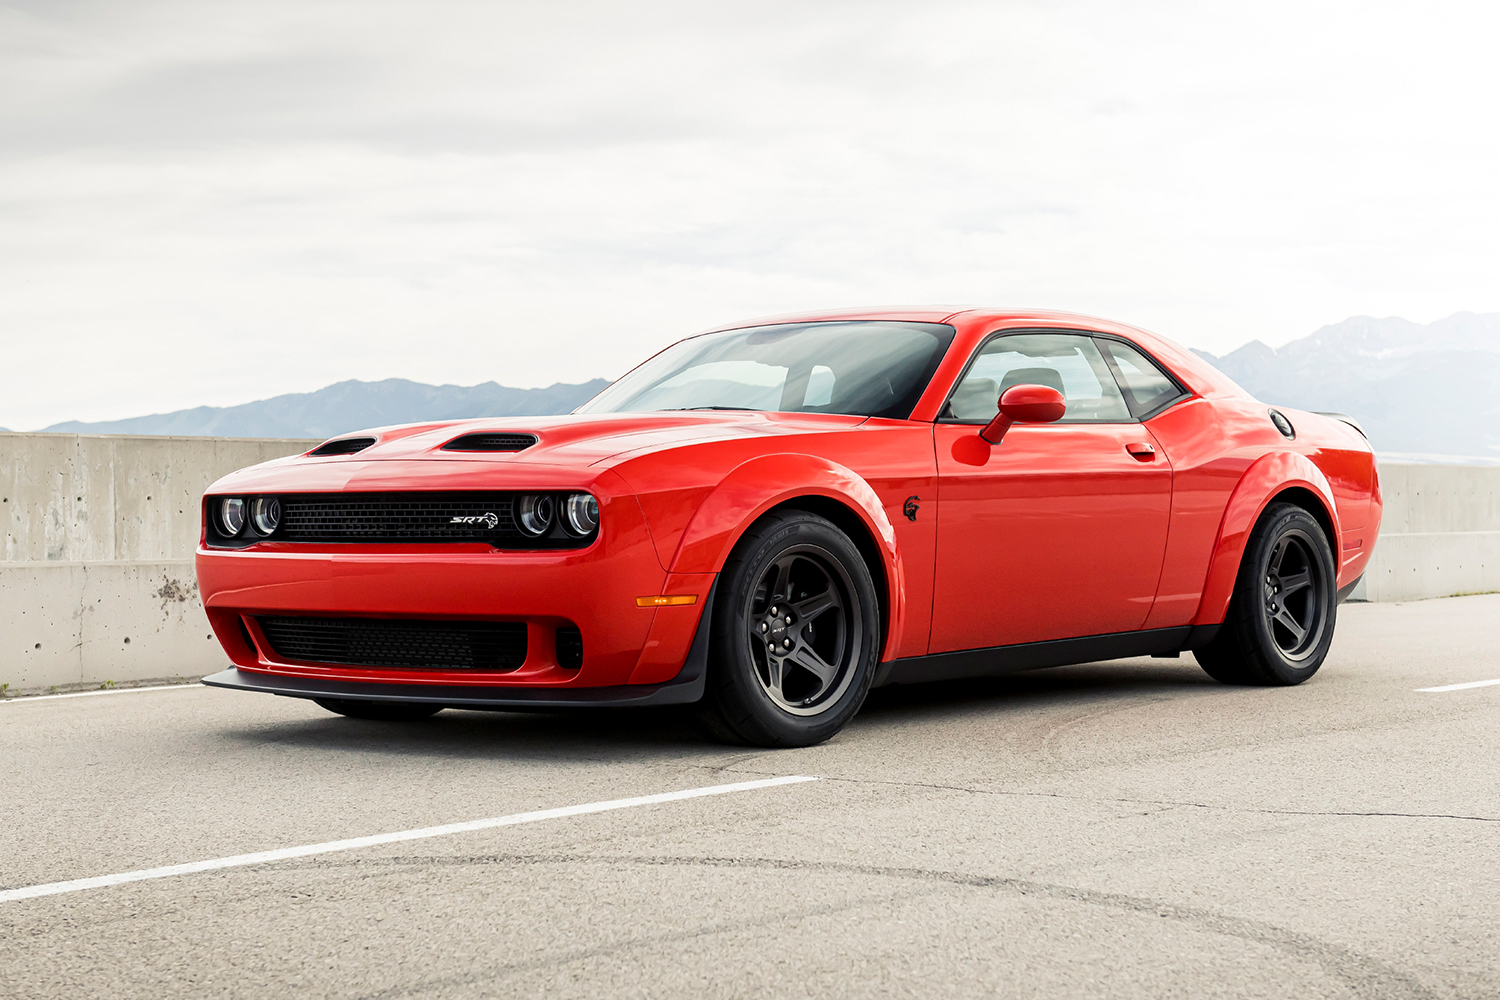 Dodge The Electric Muscle Car Era Starts in 2024. First Views in 2022